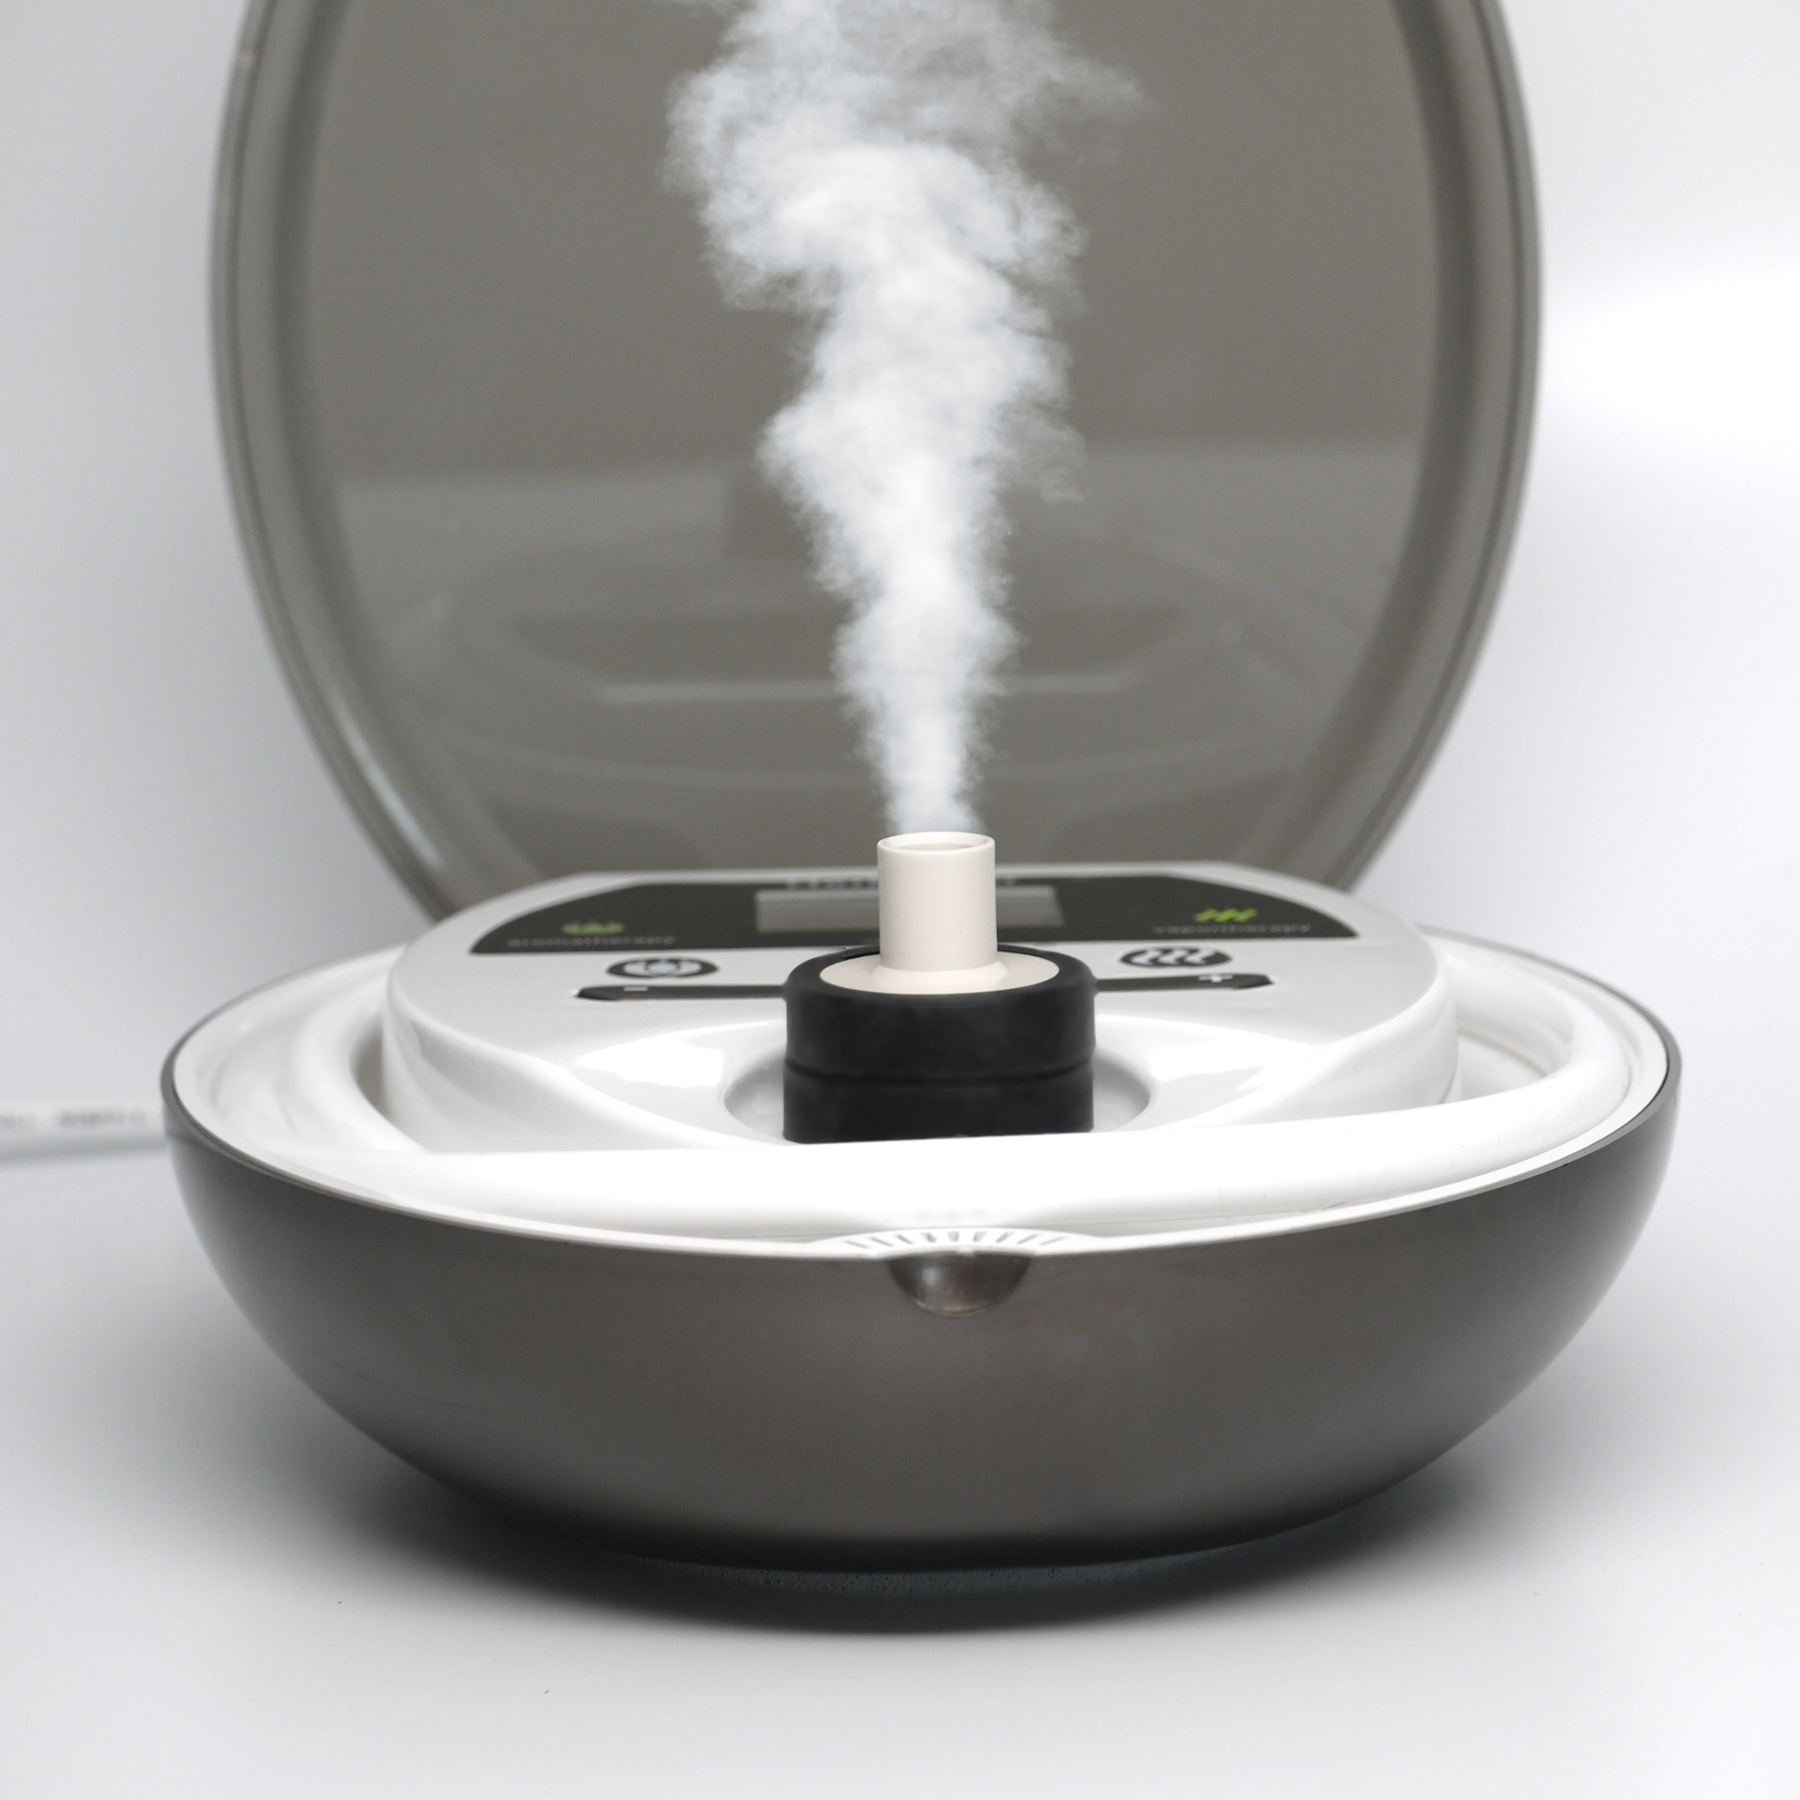 Product Review: The Herbalizer - The World's First Smartvape - Weedist